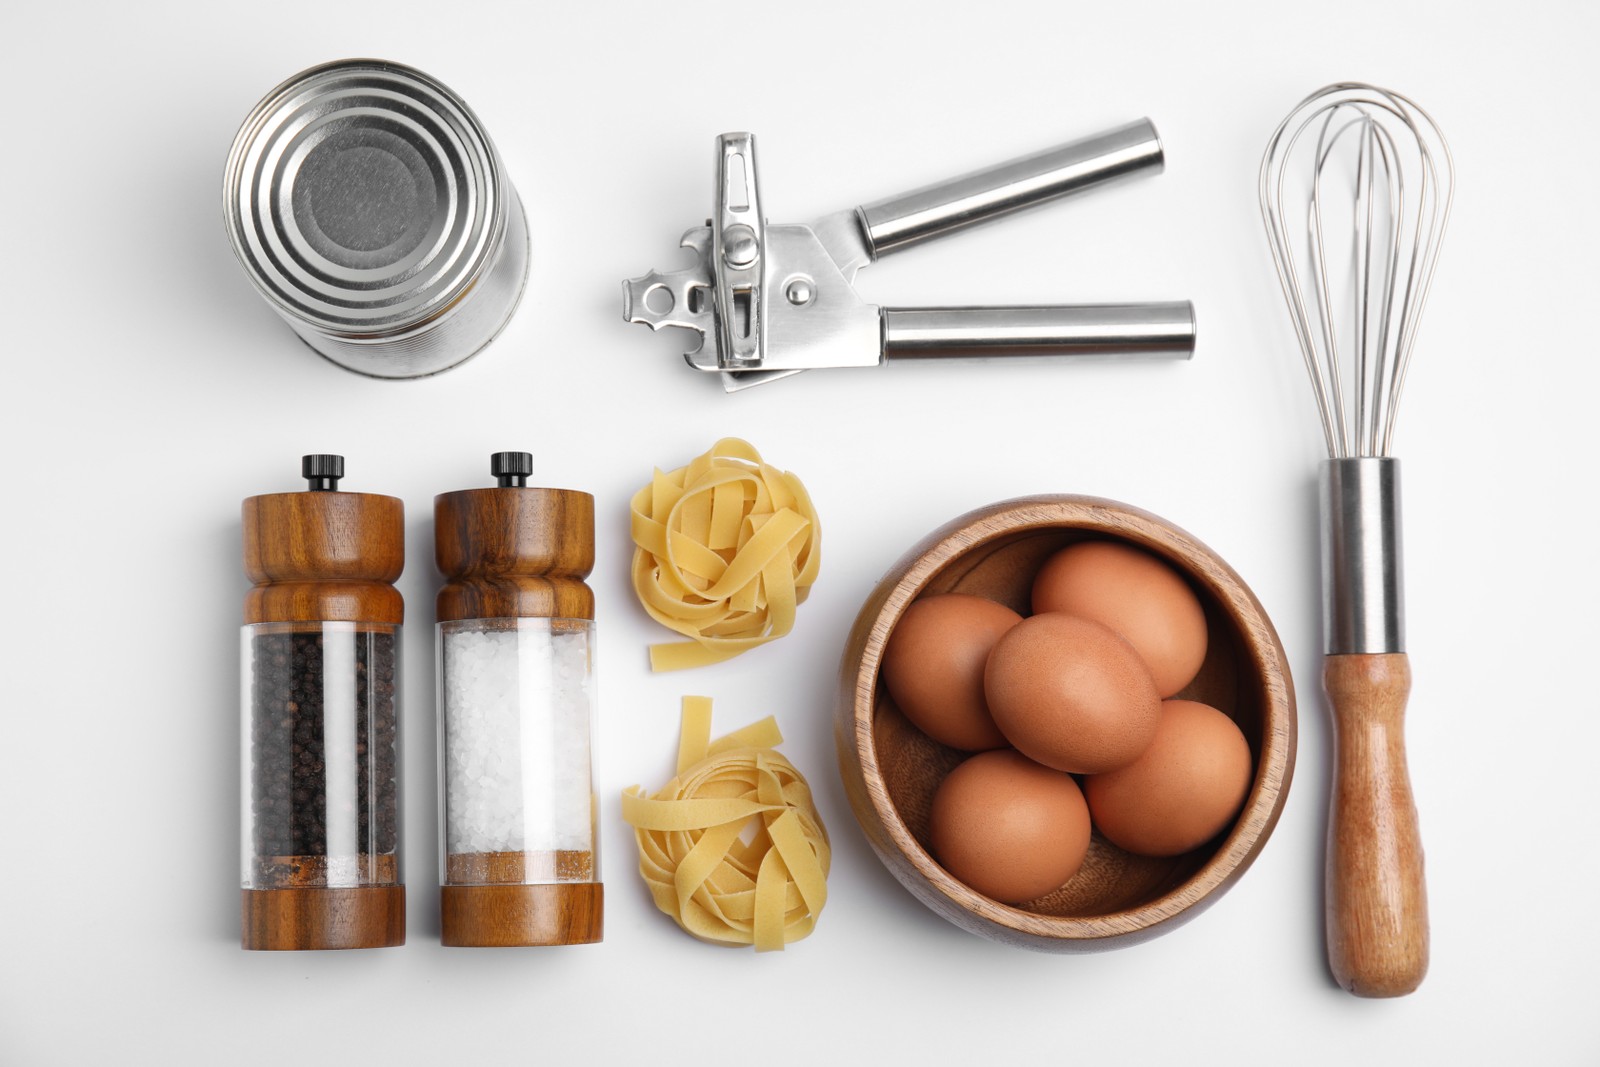 Free photo of cooking utensils and ingredients on white background, top view